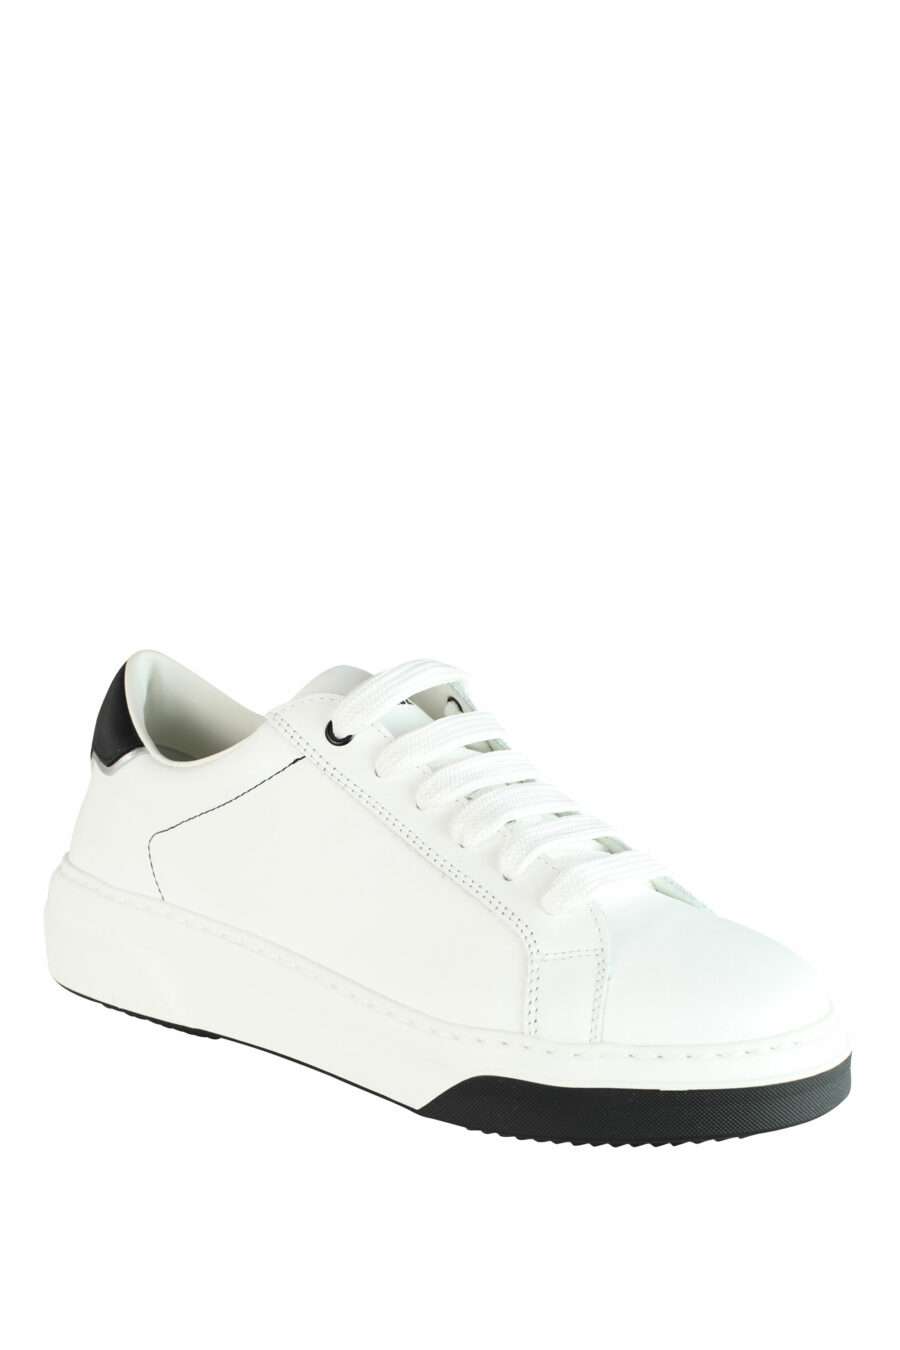 White "bumper" trainers with black details and logo - IMG 1426